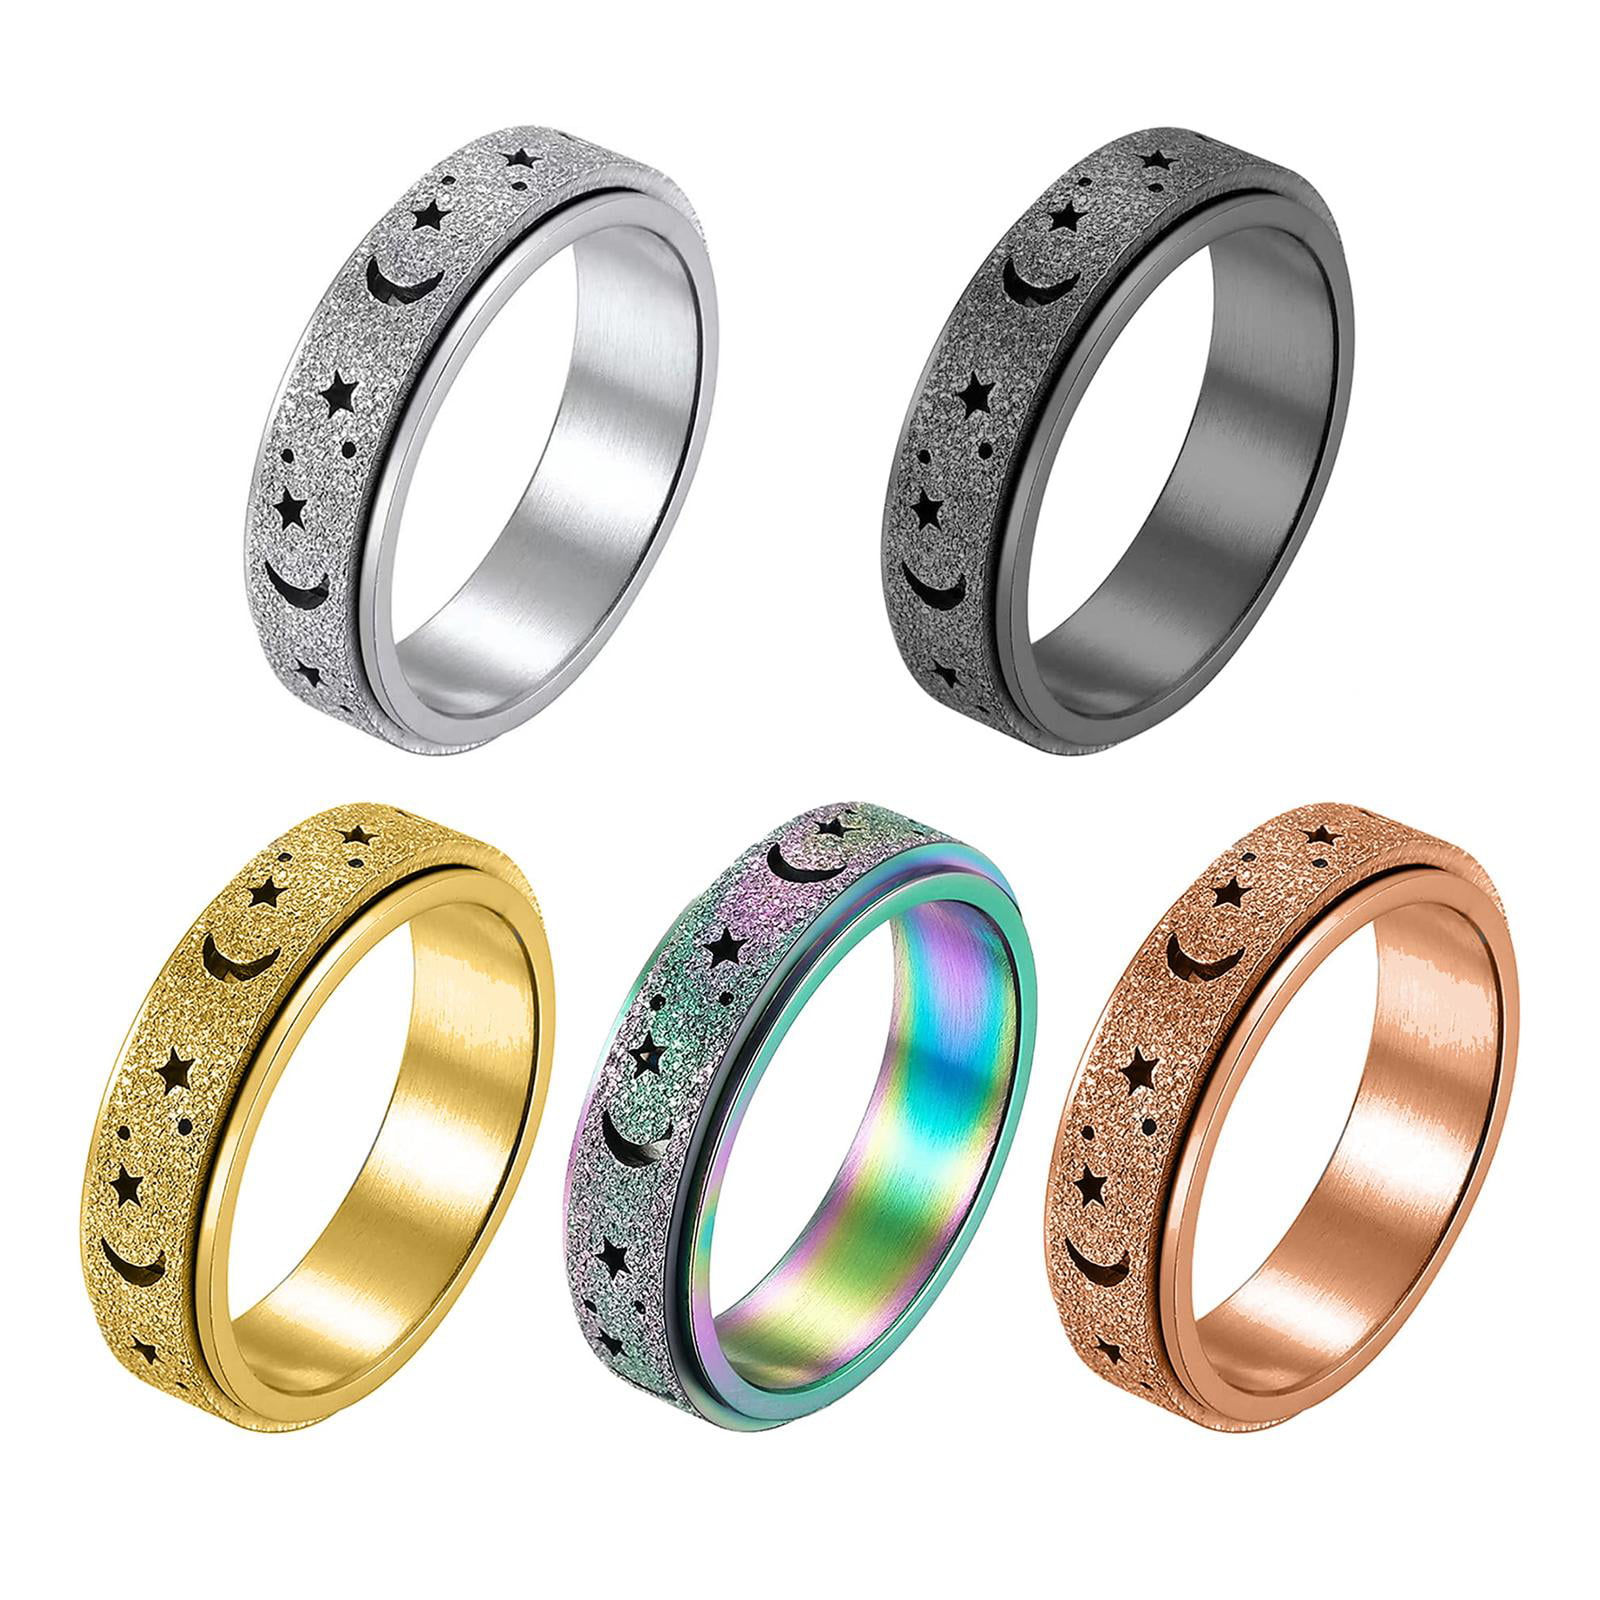 Dropship 3 Pcs Spinner Anxiety Ring Fidget Band Rings Set Stainless Steel  For Women Men Rotating Colorful Rings Sand Blast Finish For Stress  Relieving Wedding Promise Rings Size 10 to Sell Online